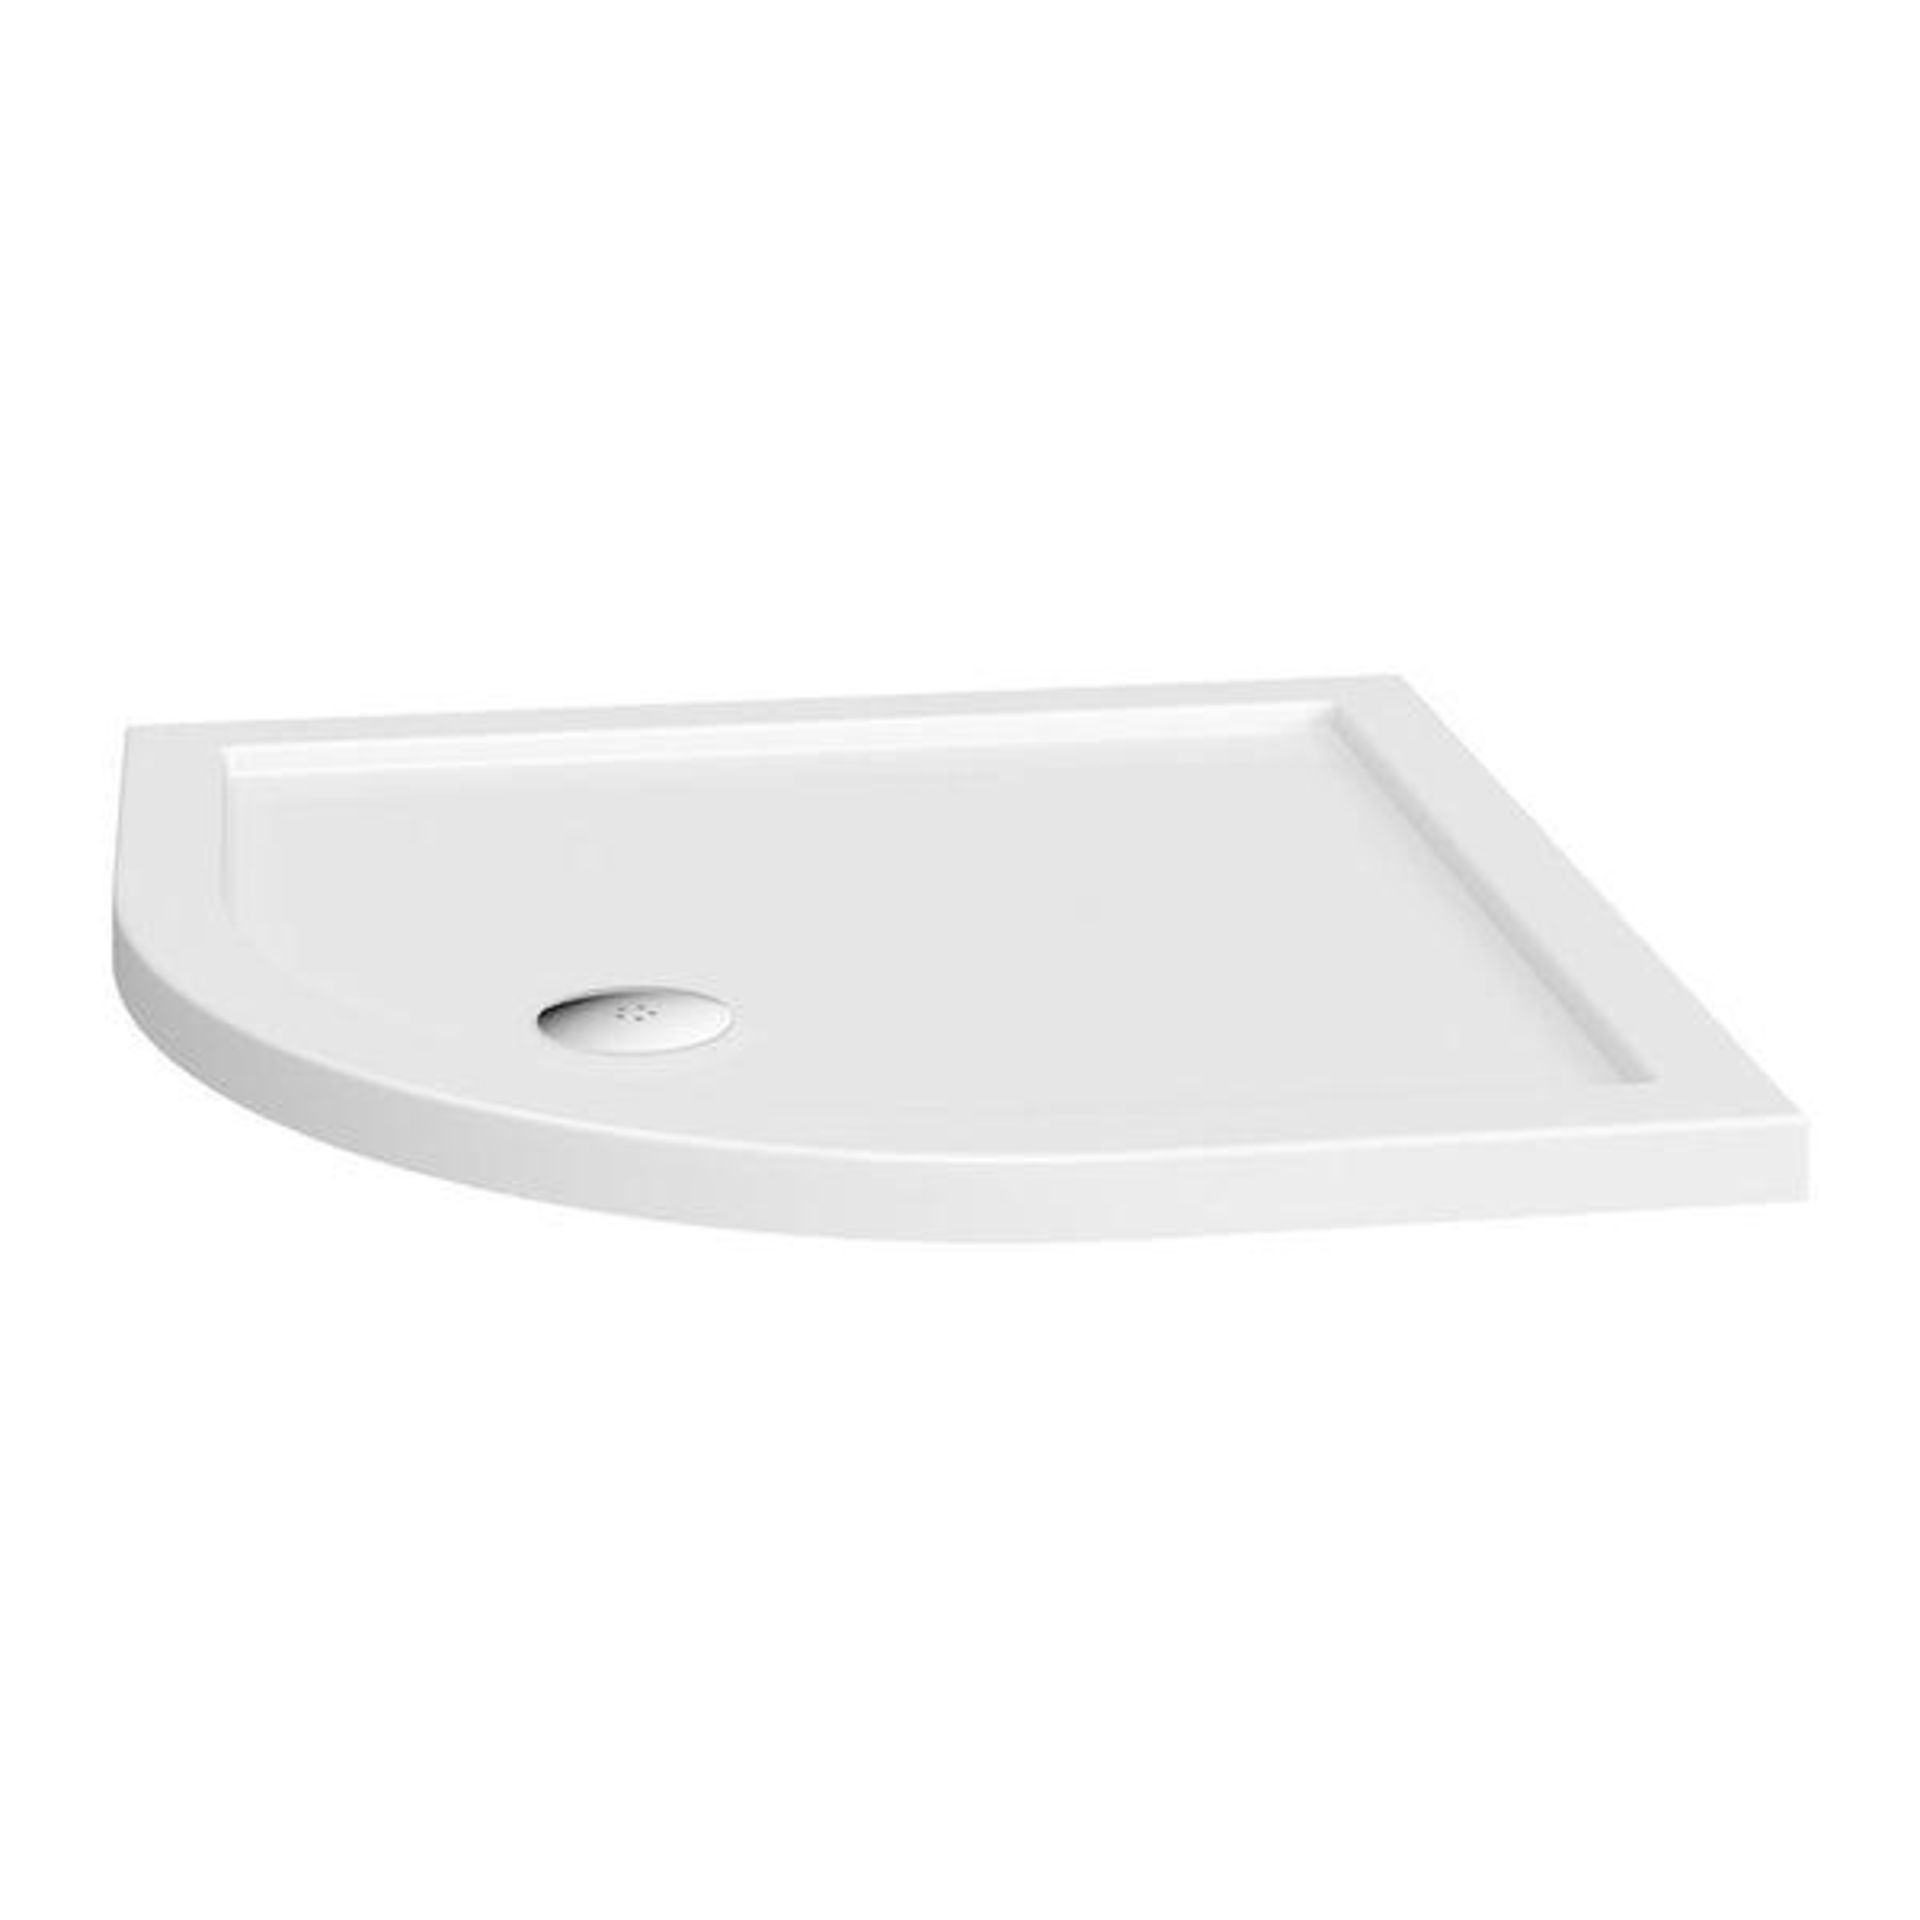 1 x Orchard Quad Slimline Stone Shower Tray - New / Unused Stock - Dimensions: 1000 x 1000 x 40mm - - Image 4 of 4